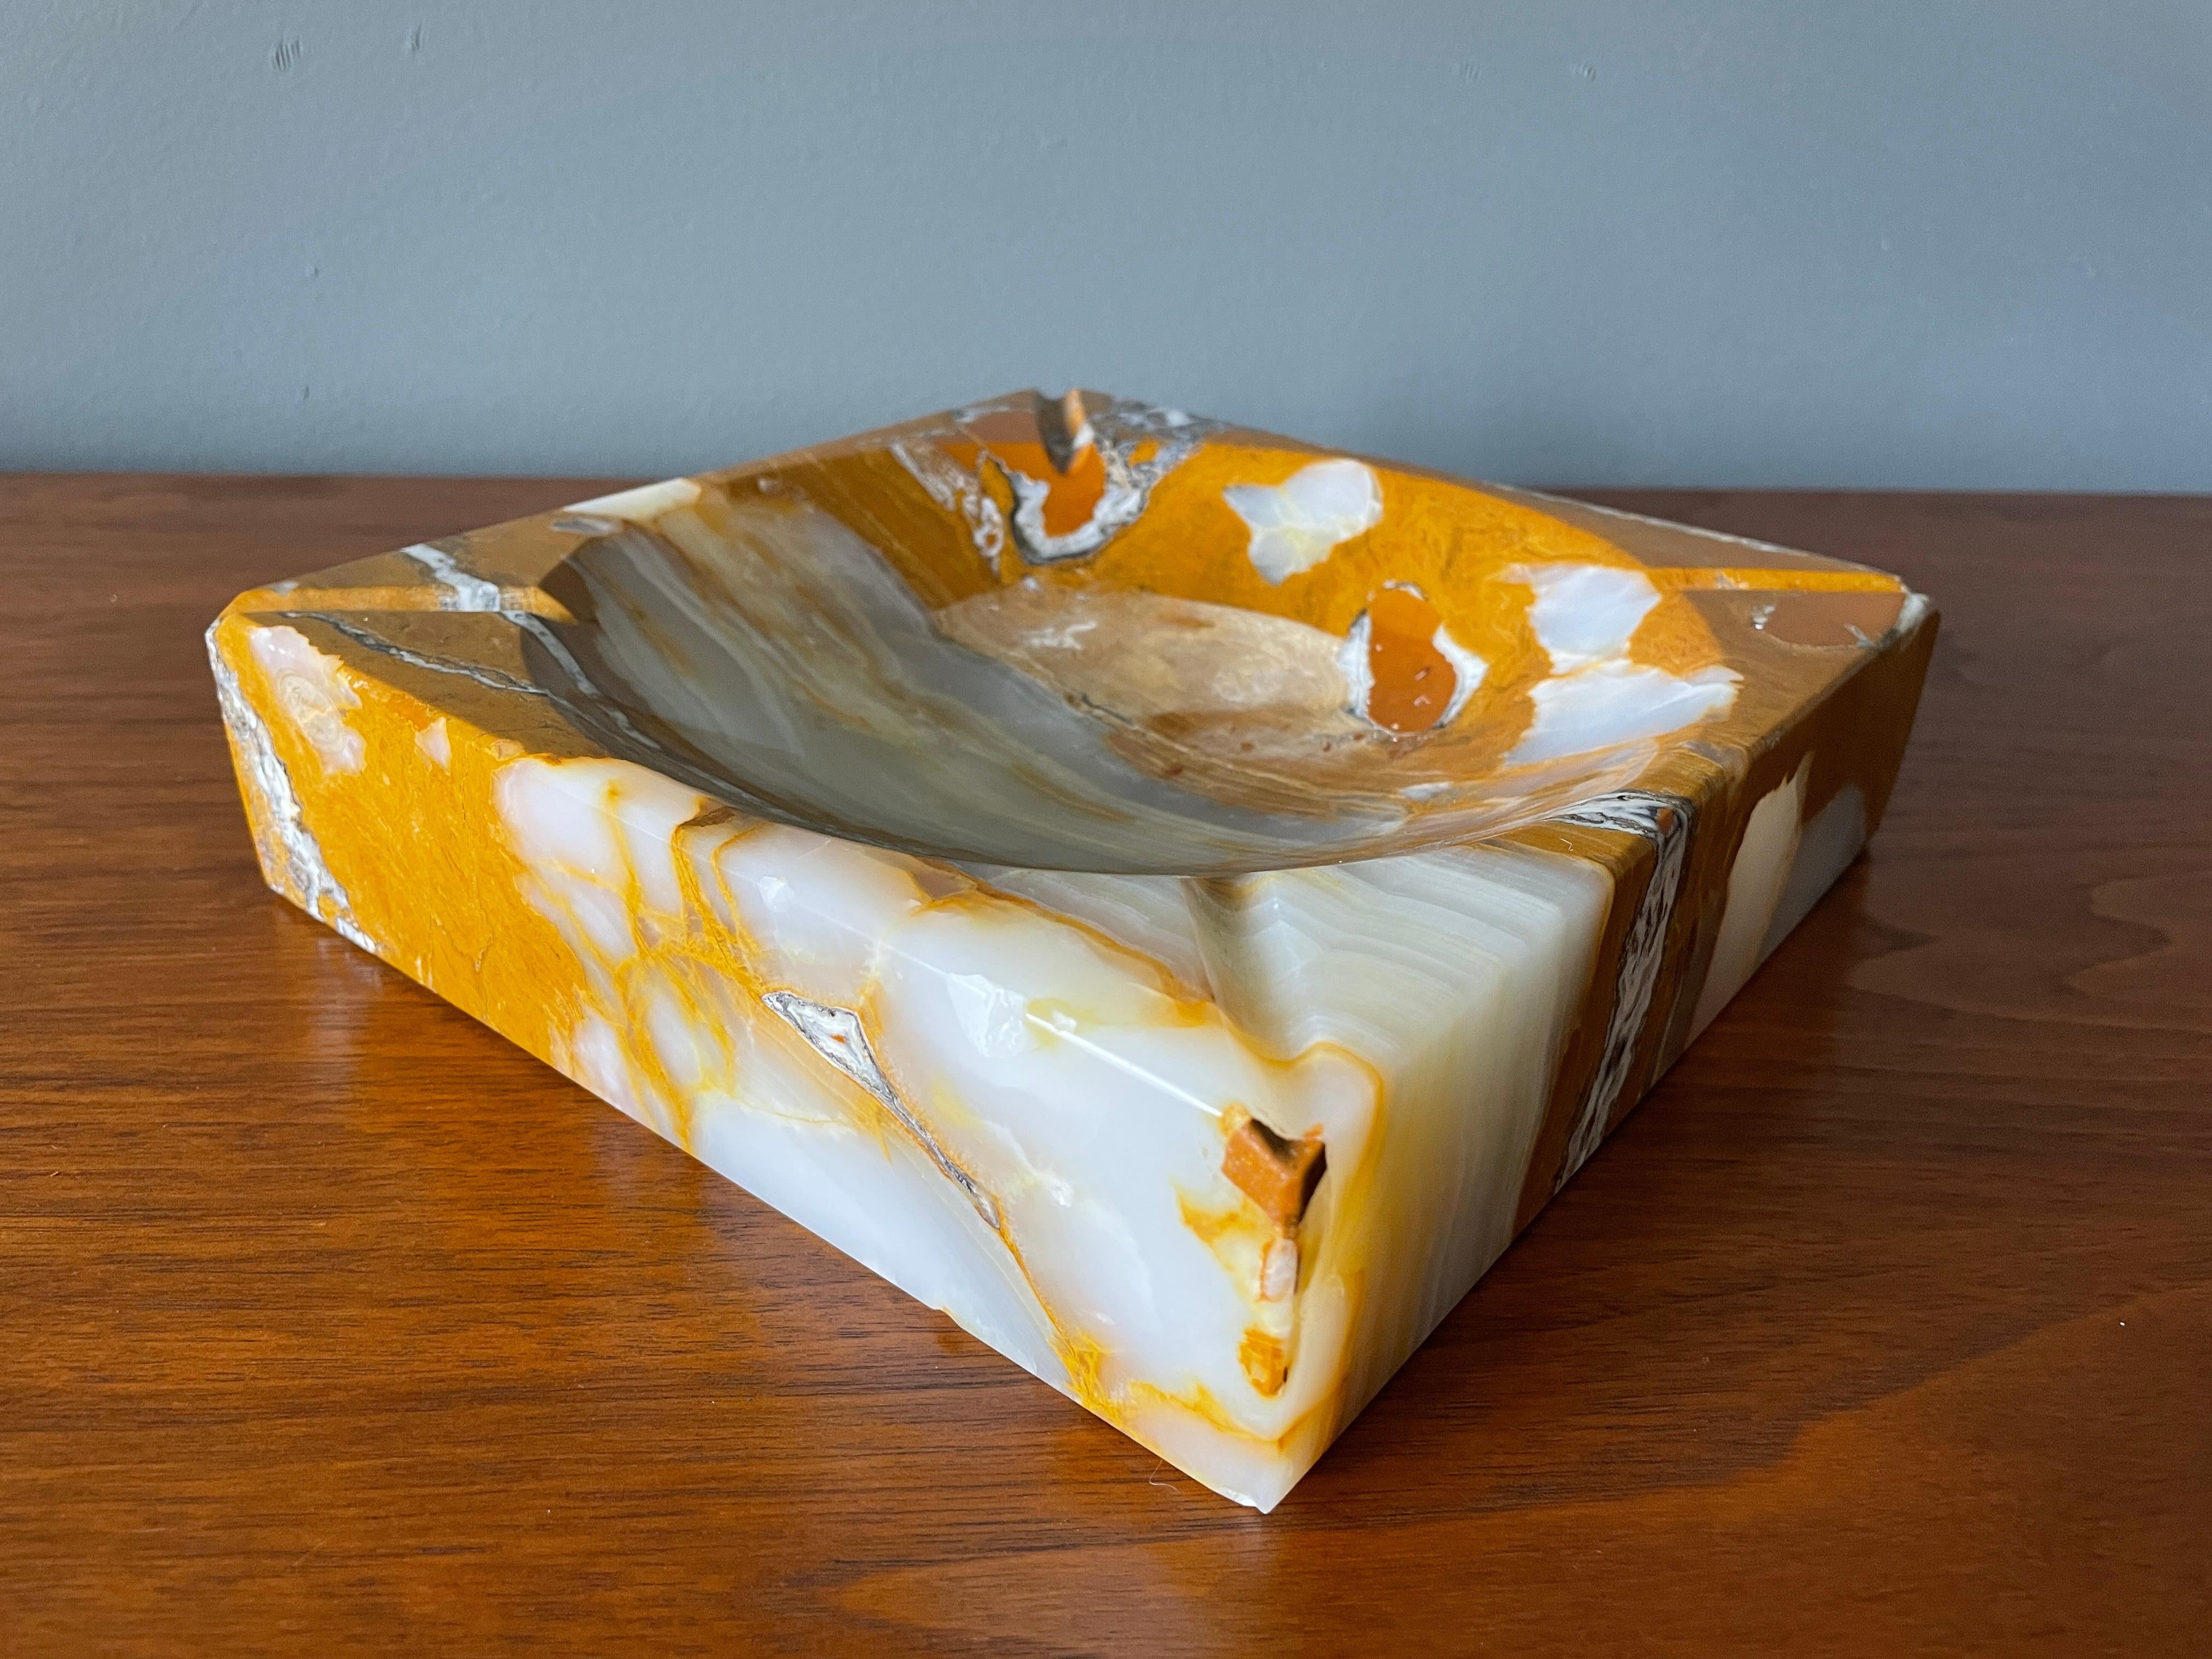 Vintage marble ashtray manufactured by Peter Pepper Products, circa 1970s. Very thick and heavy with a beautiful vein pattern. Highly polished with beveled edges.